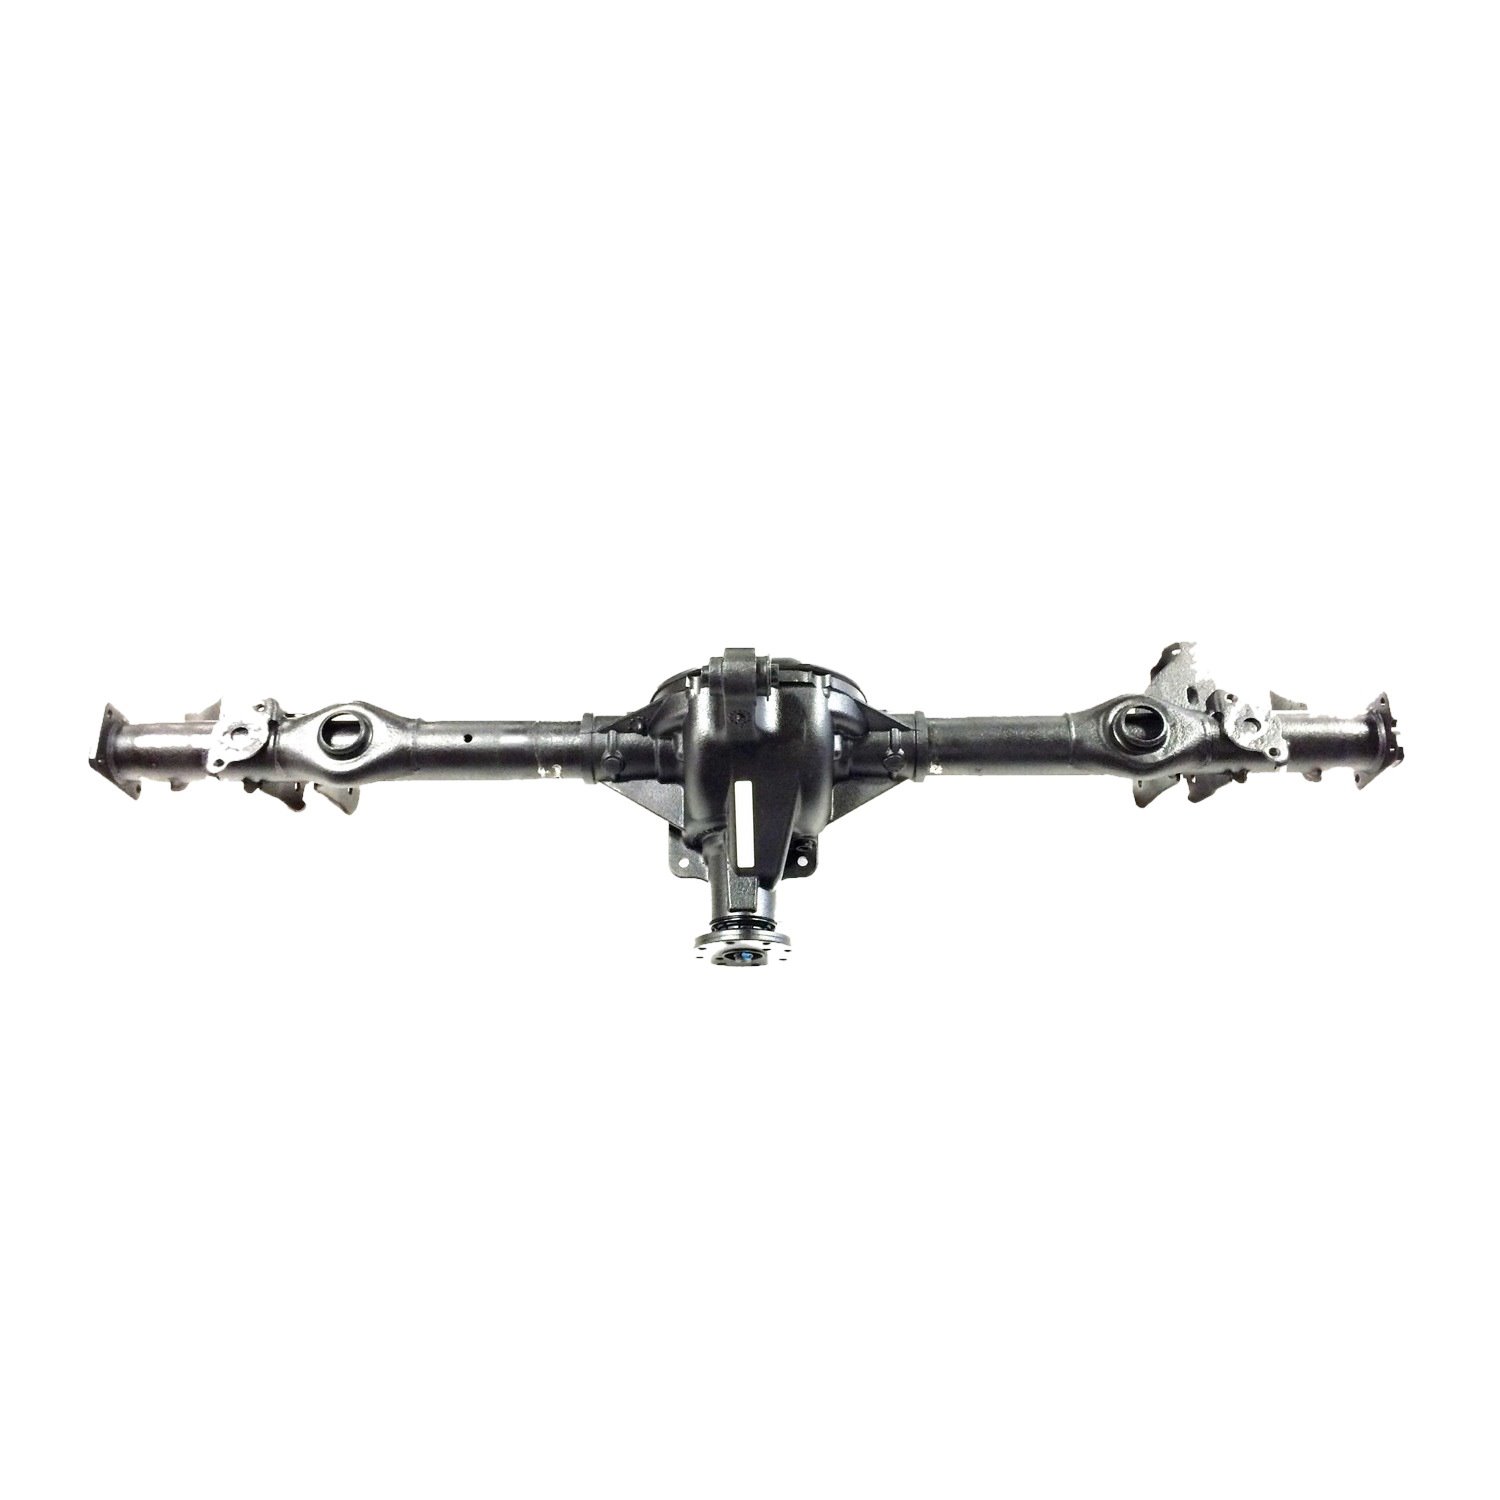 Remanufactured Rear Axle Assy, Ford 203mm/8.0 In., 2003-06 Thunderbird, LS, 3.58 Ratio